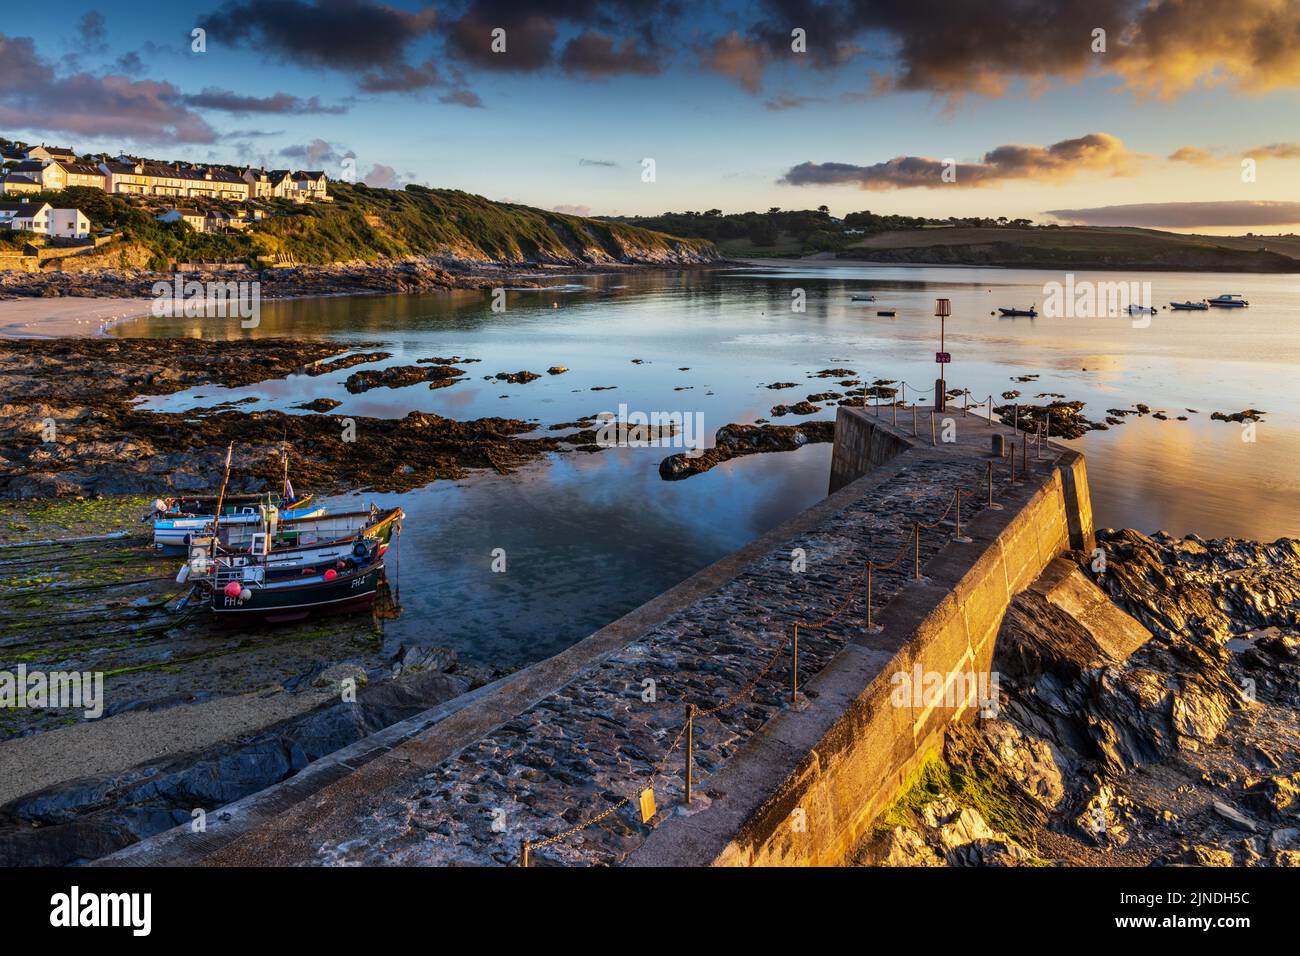 A beautiful sunrise at Portscatho Harbour in Cornwall, England. Stock Photo